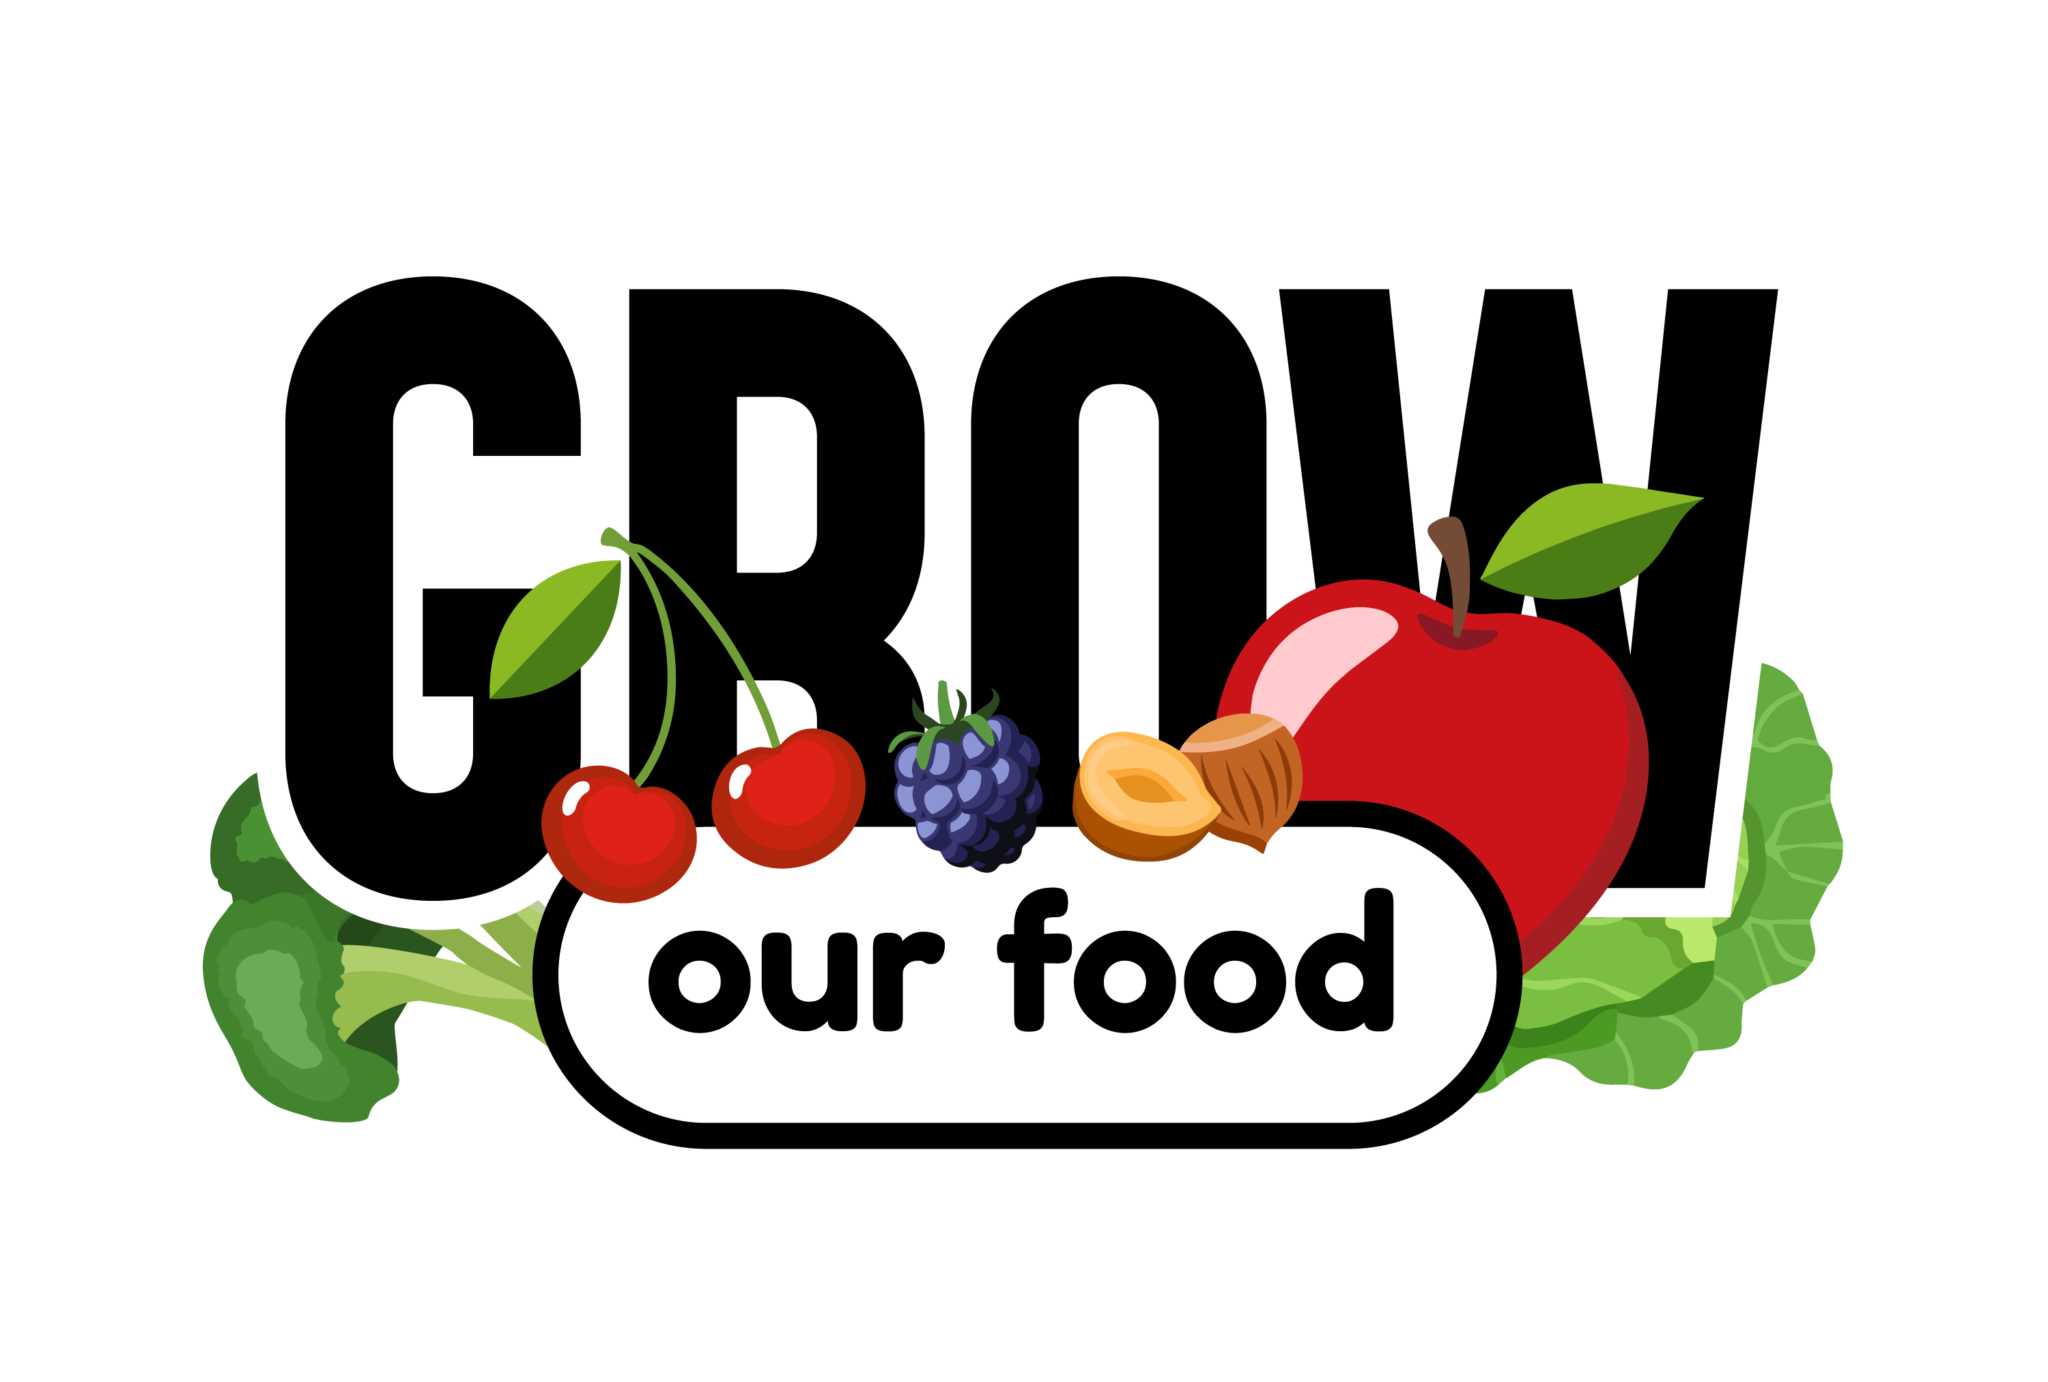 Member to Member Webinar with Grow our Food